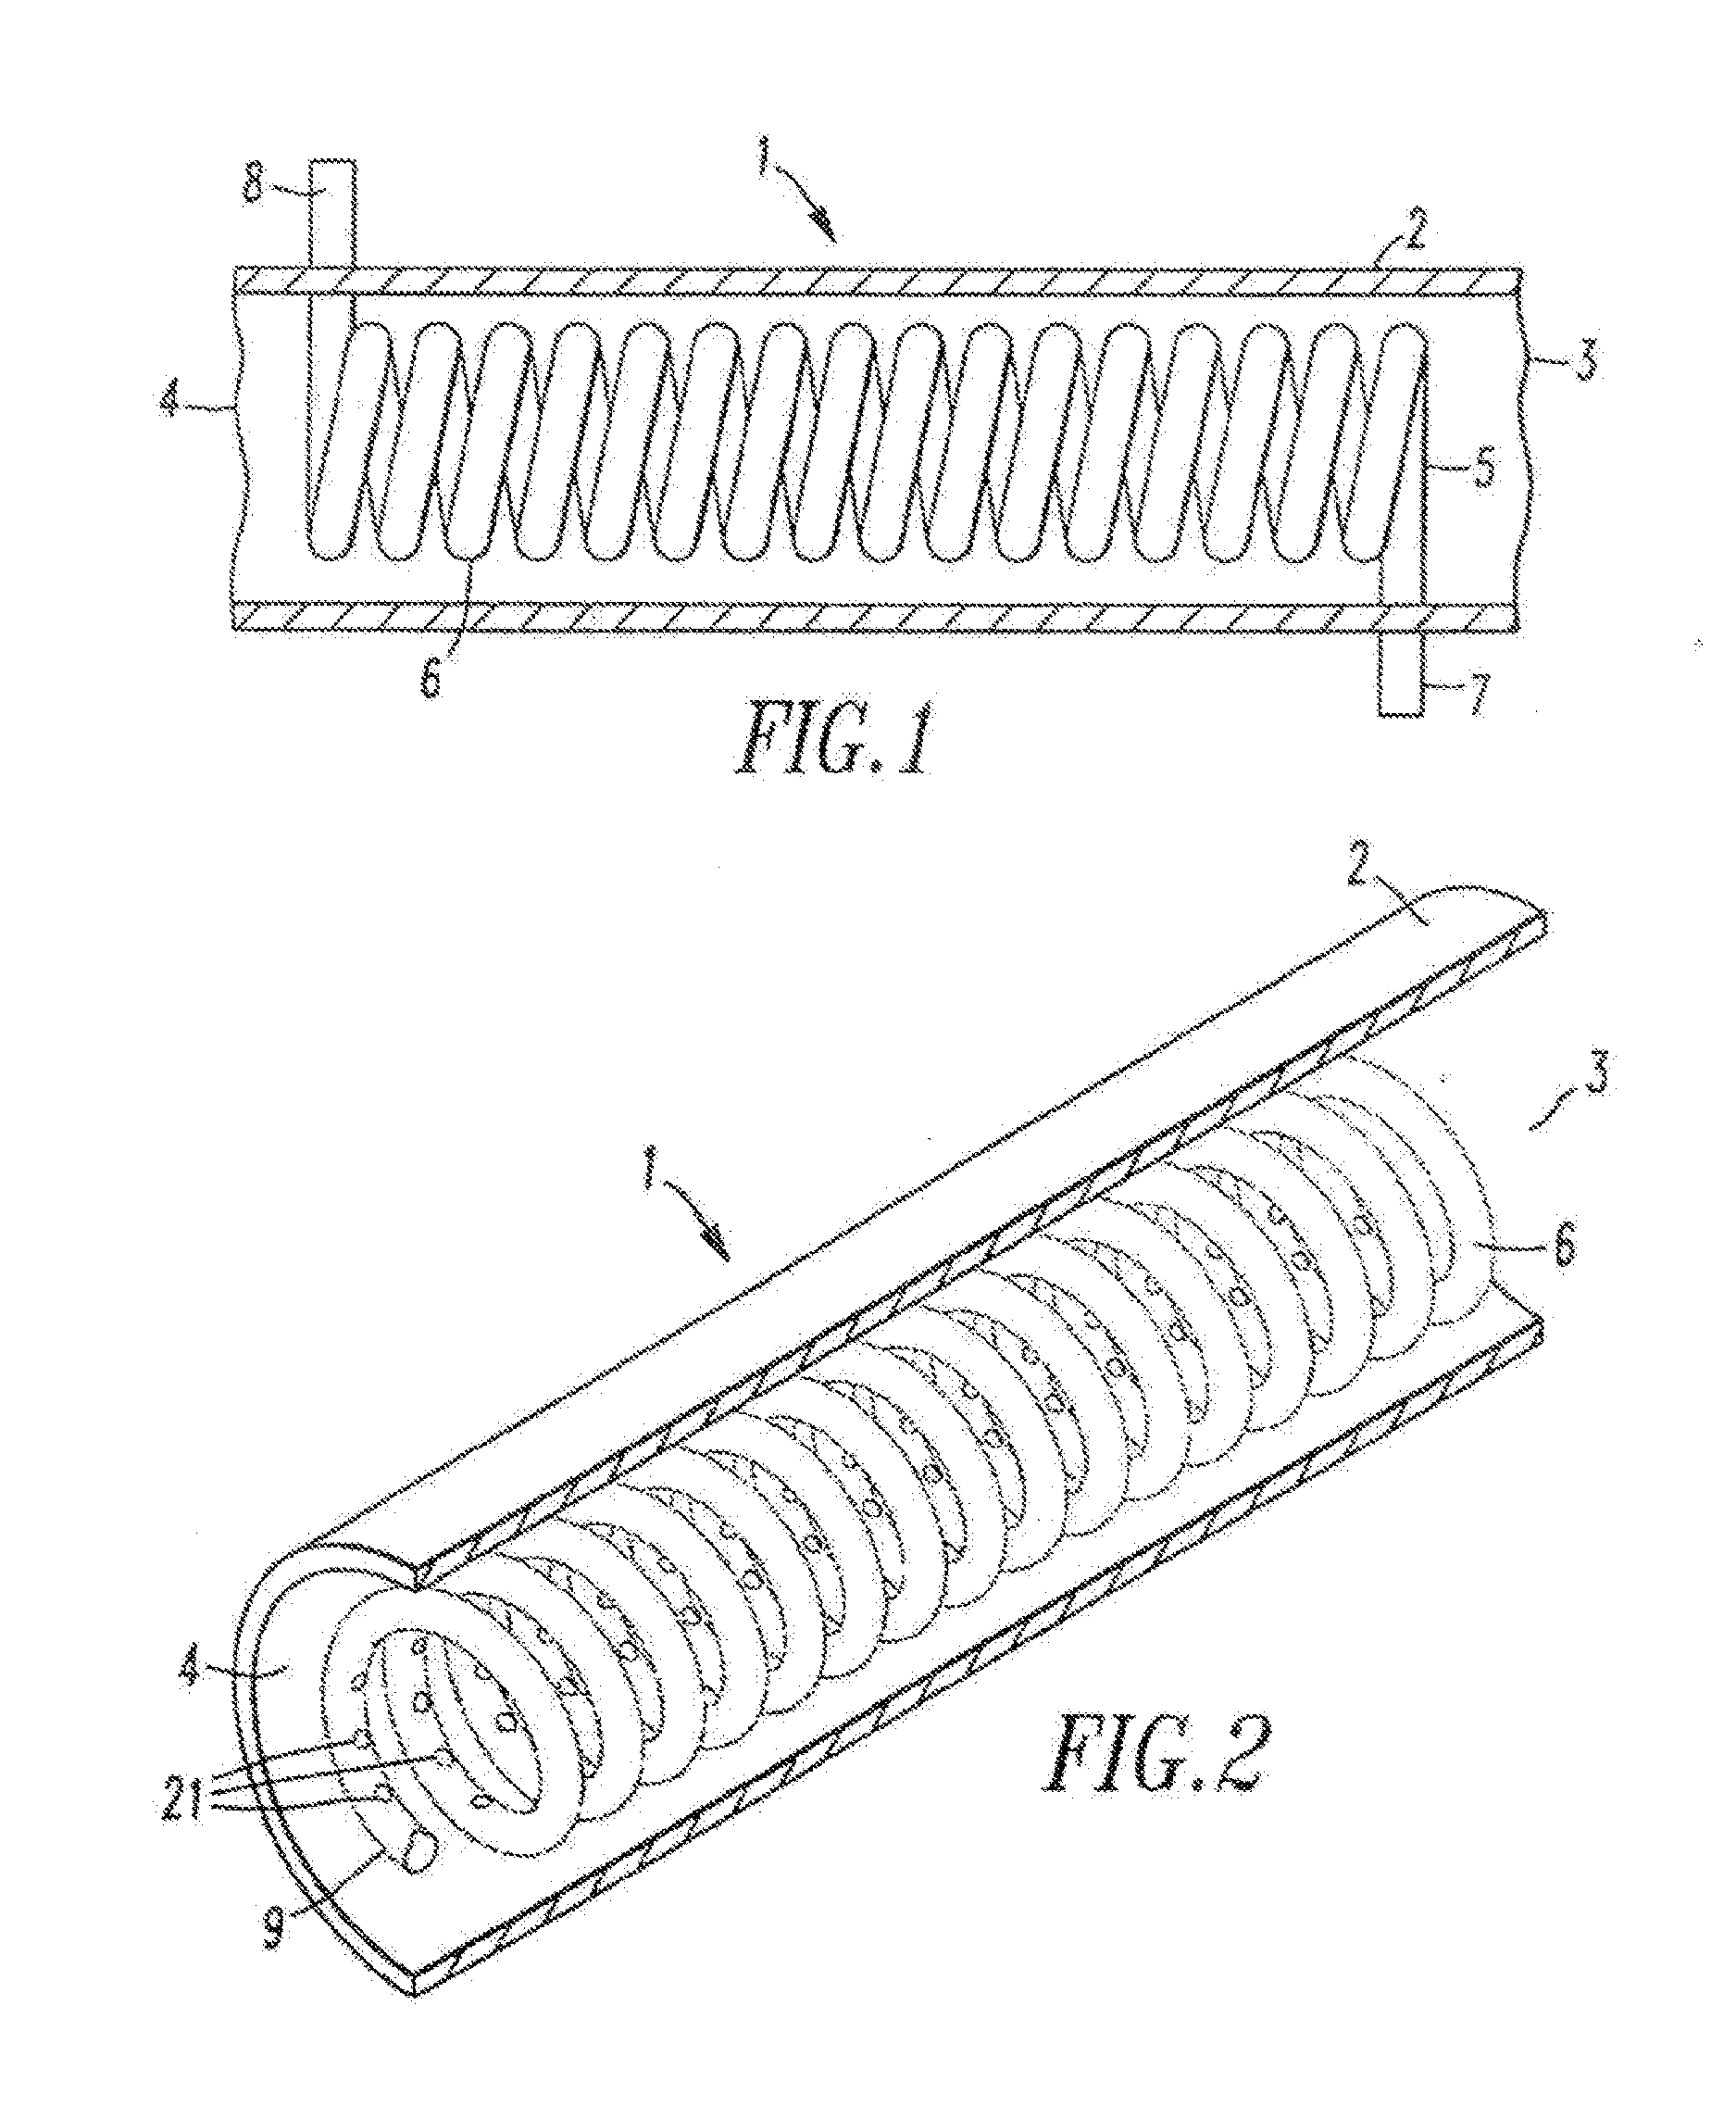 Method for treating infectious diseases using emissive energy